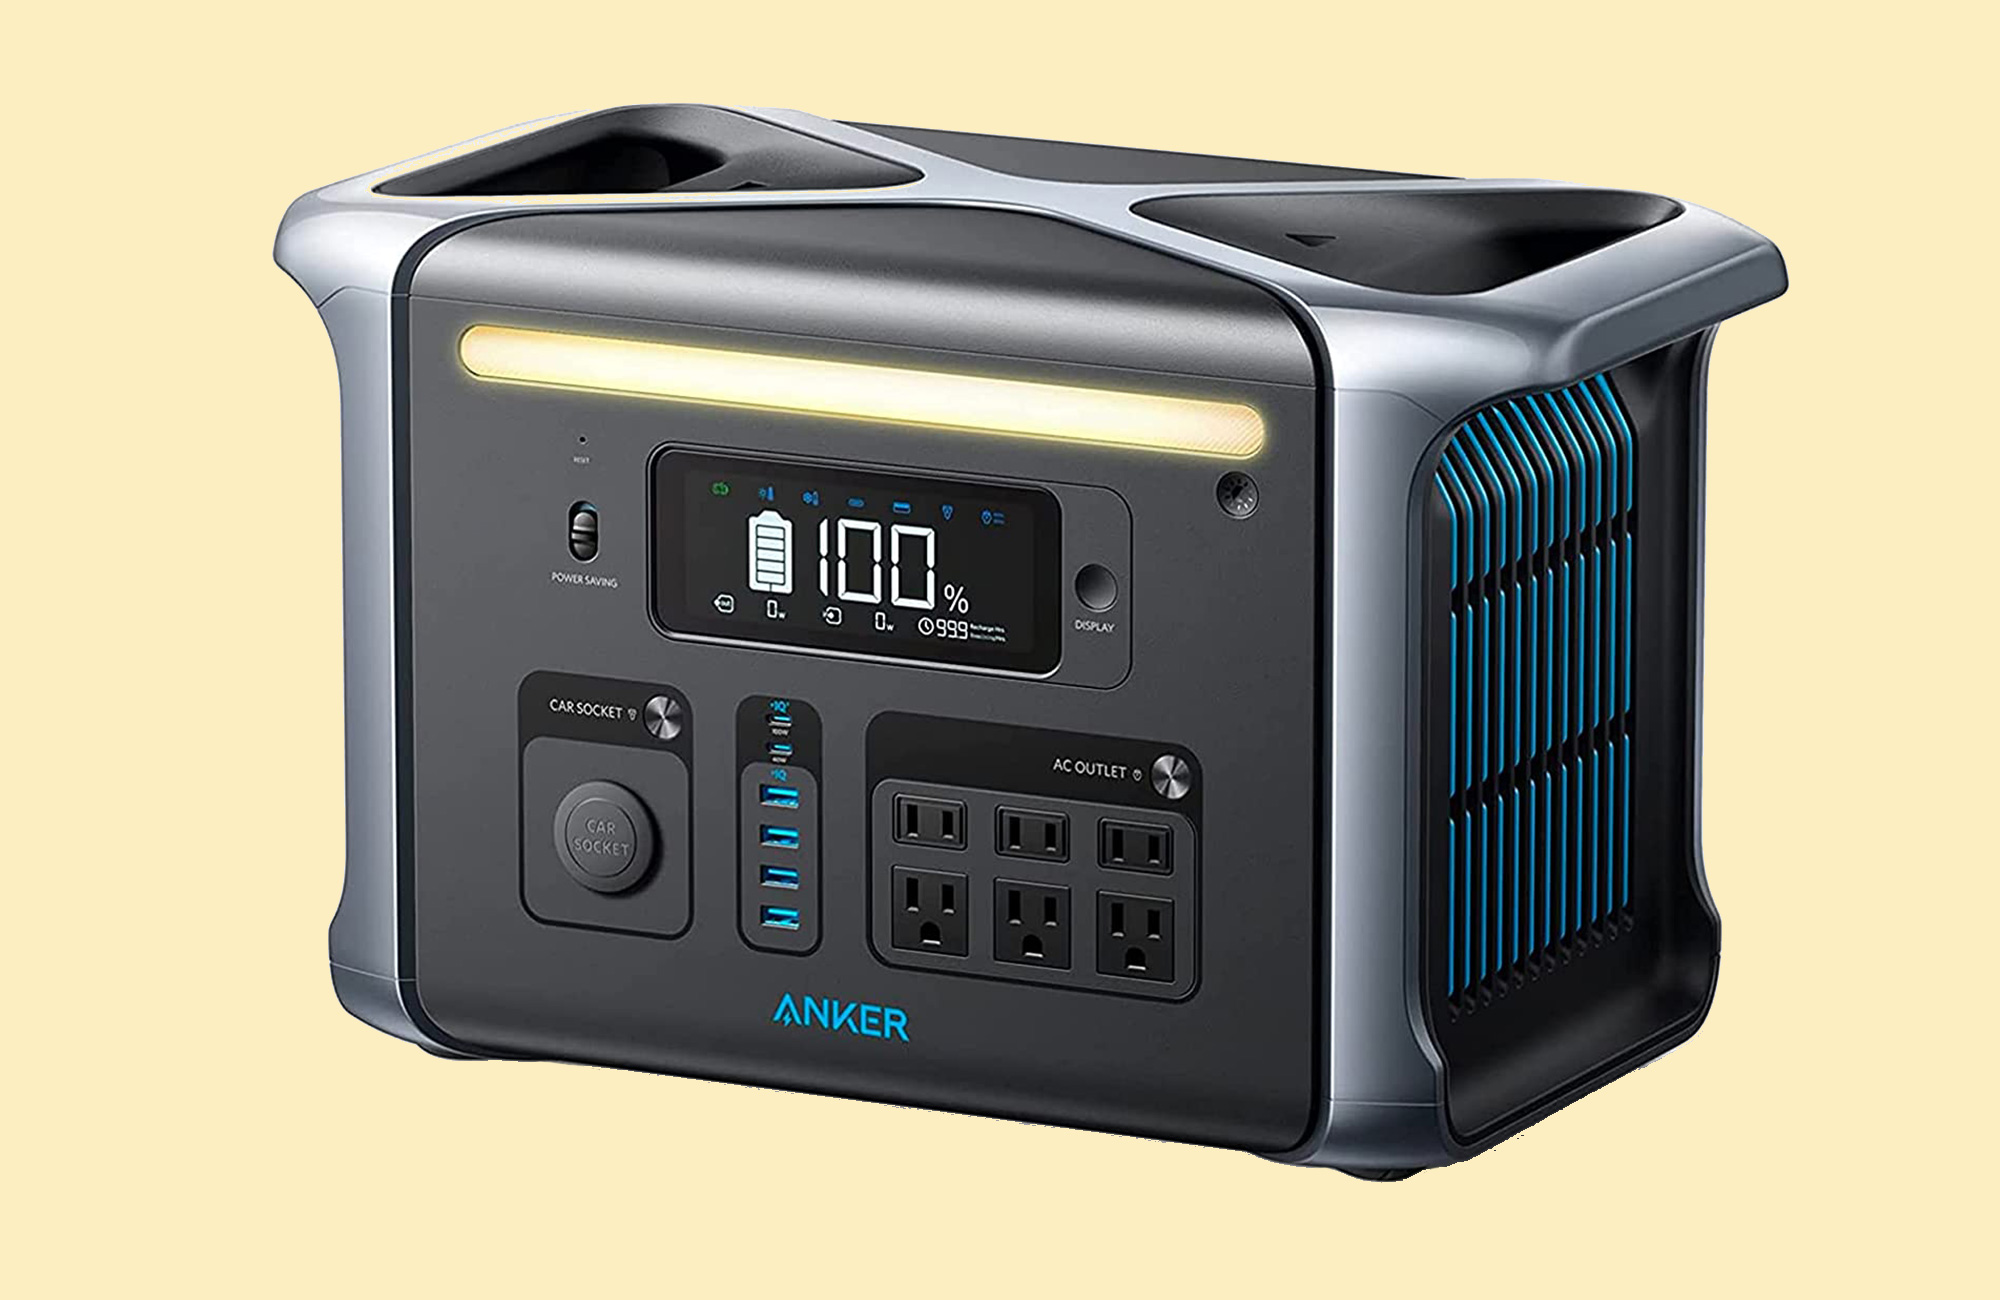 Save more than $400 on Anker Portable Power Stations for Black Friday